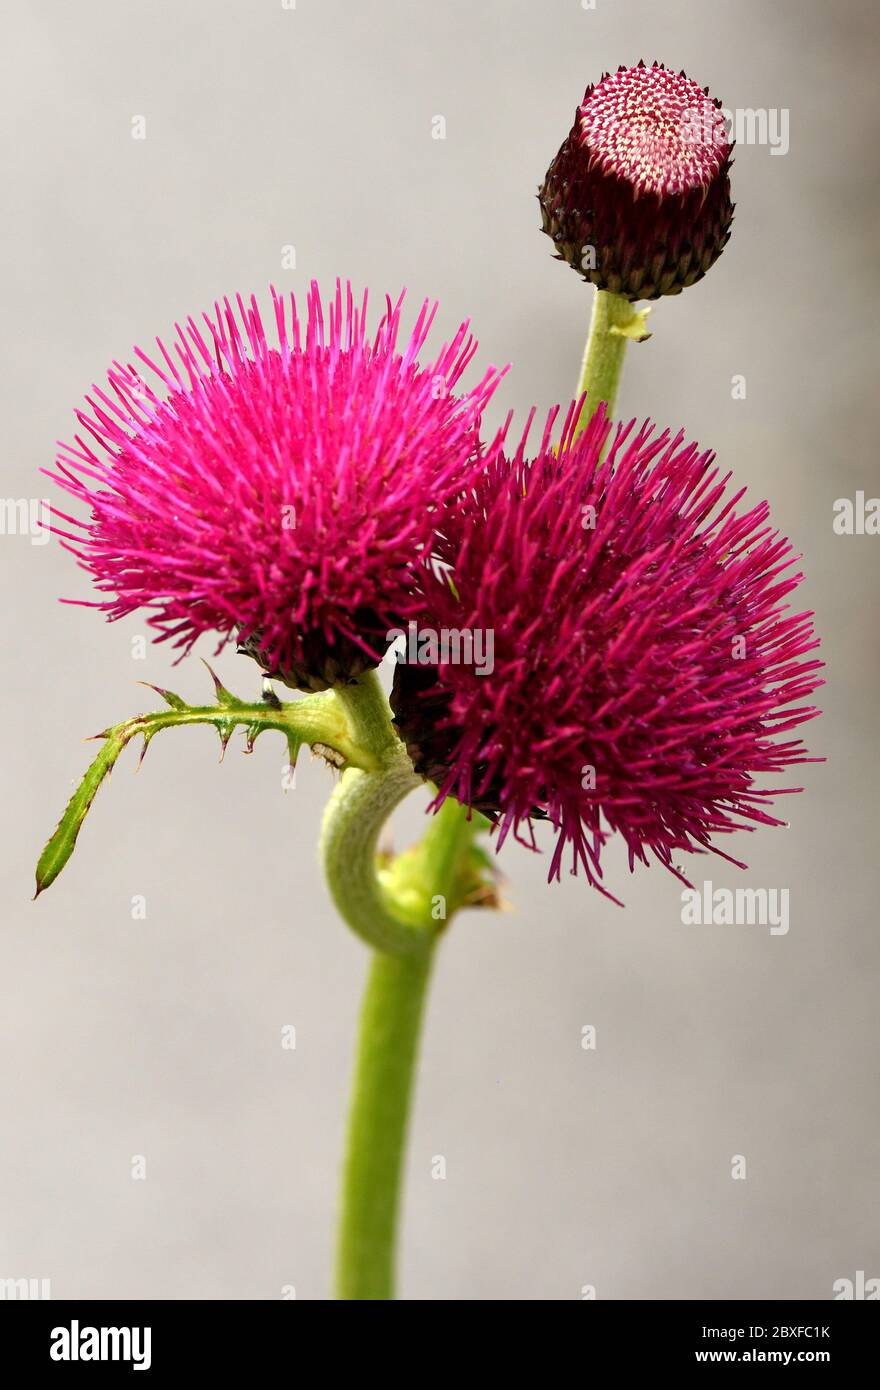 The red flower of a Plume Thistle in closeup. Stock Photo